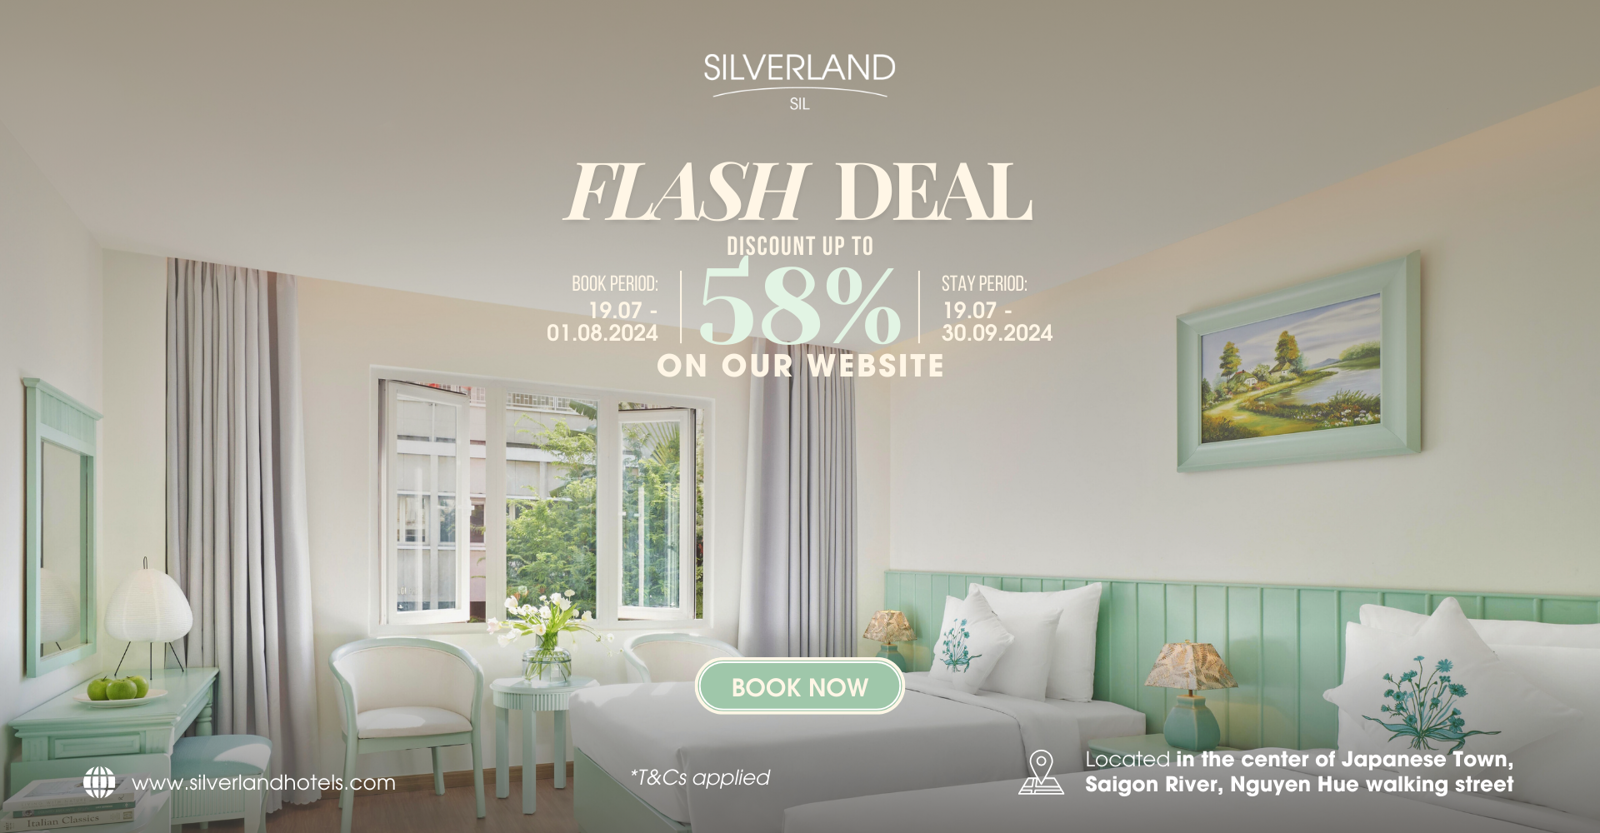 FLASH DEAL PACKAGE (SIL HOTEL)